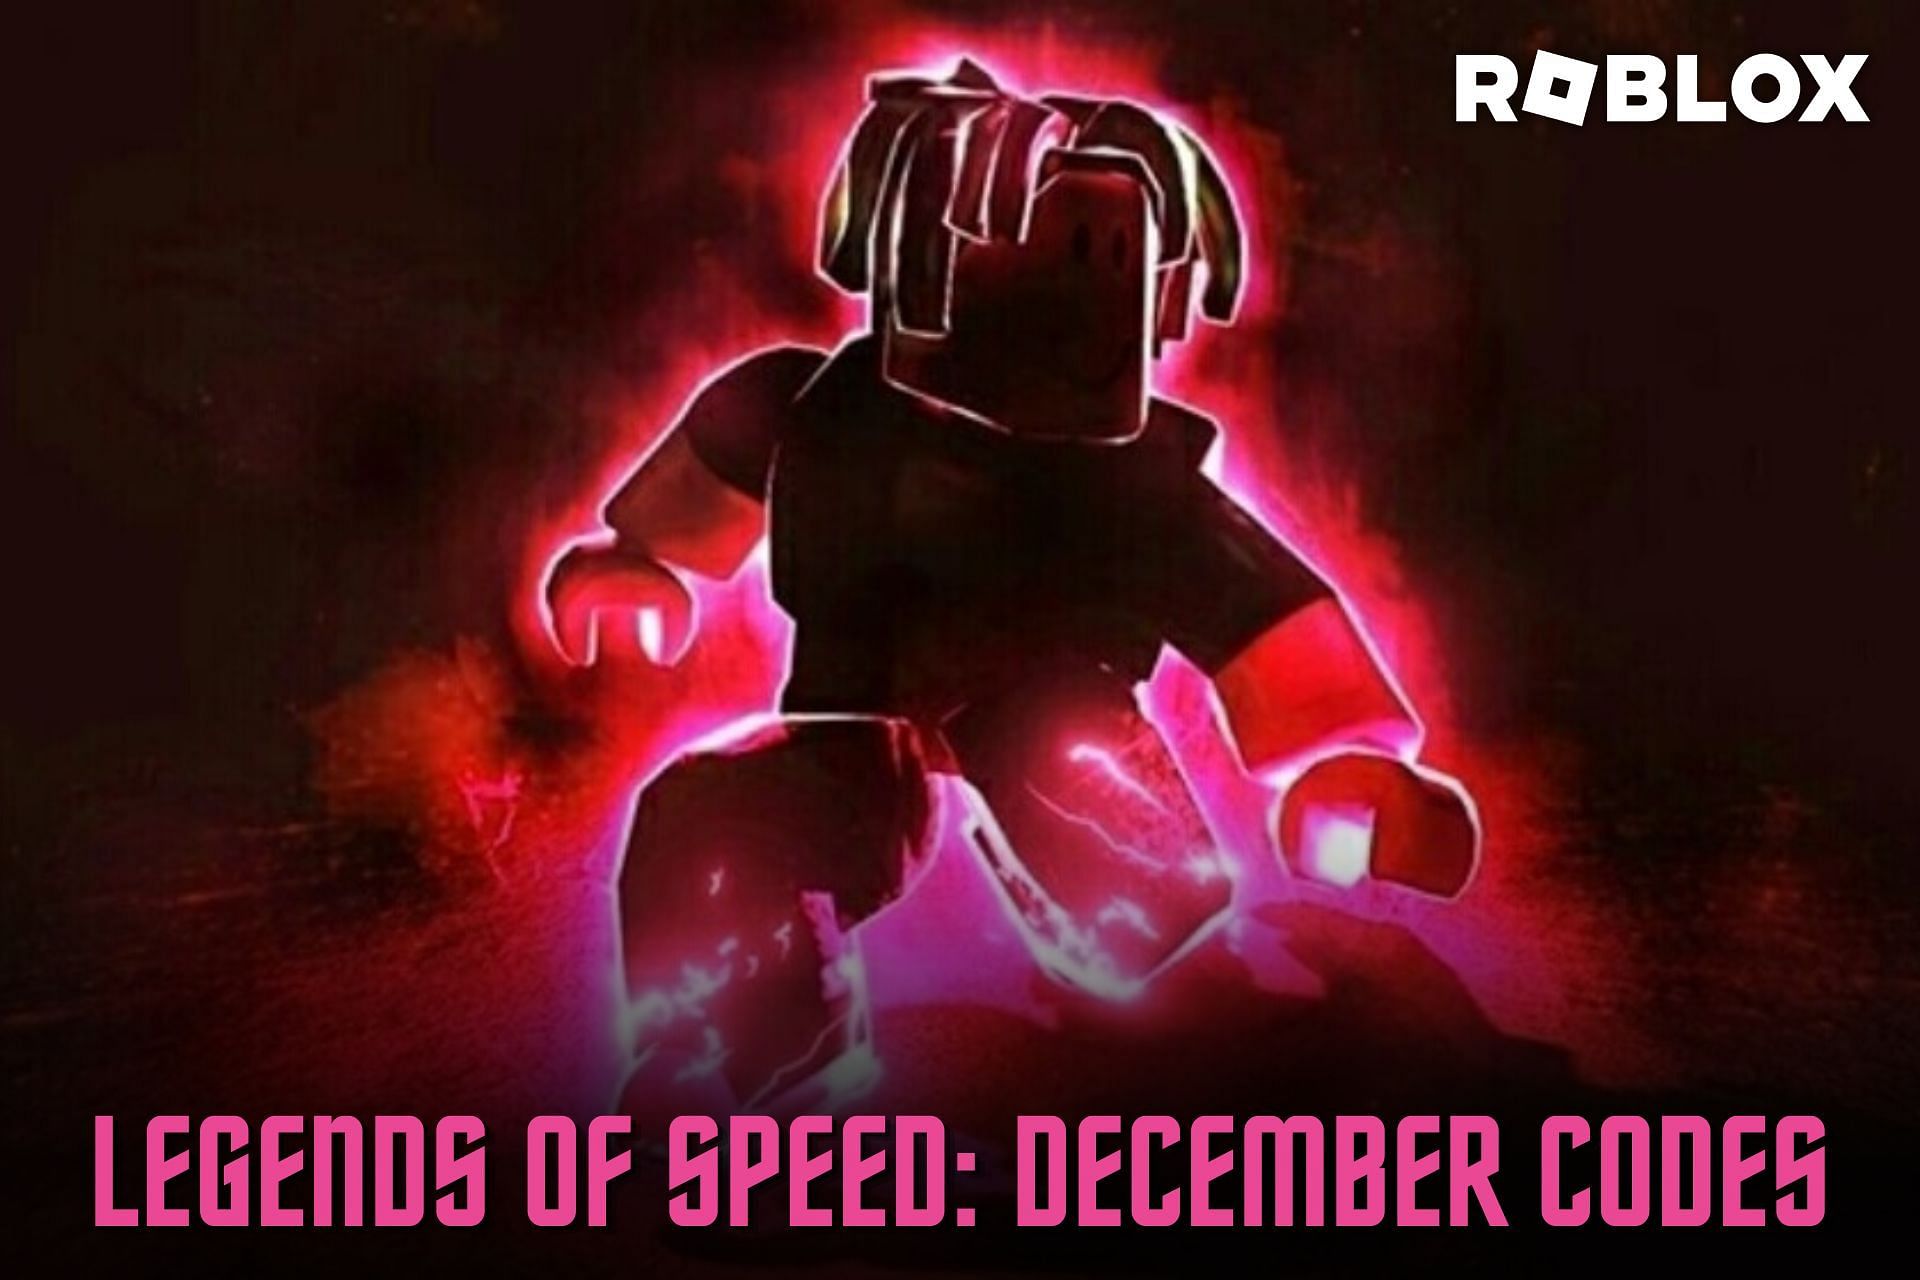 Roblox Legends of Speed codes for December Free steps and gems